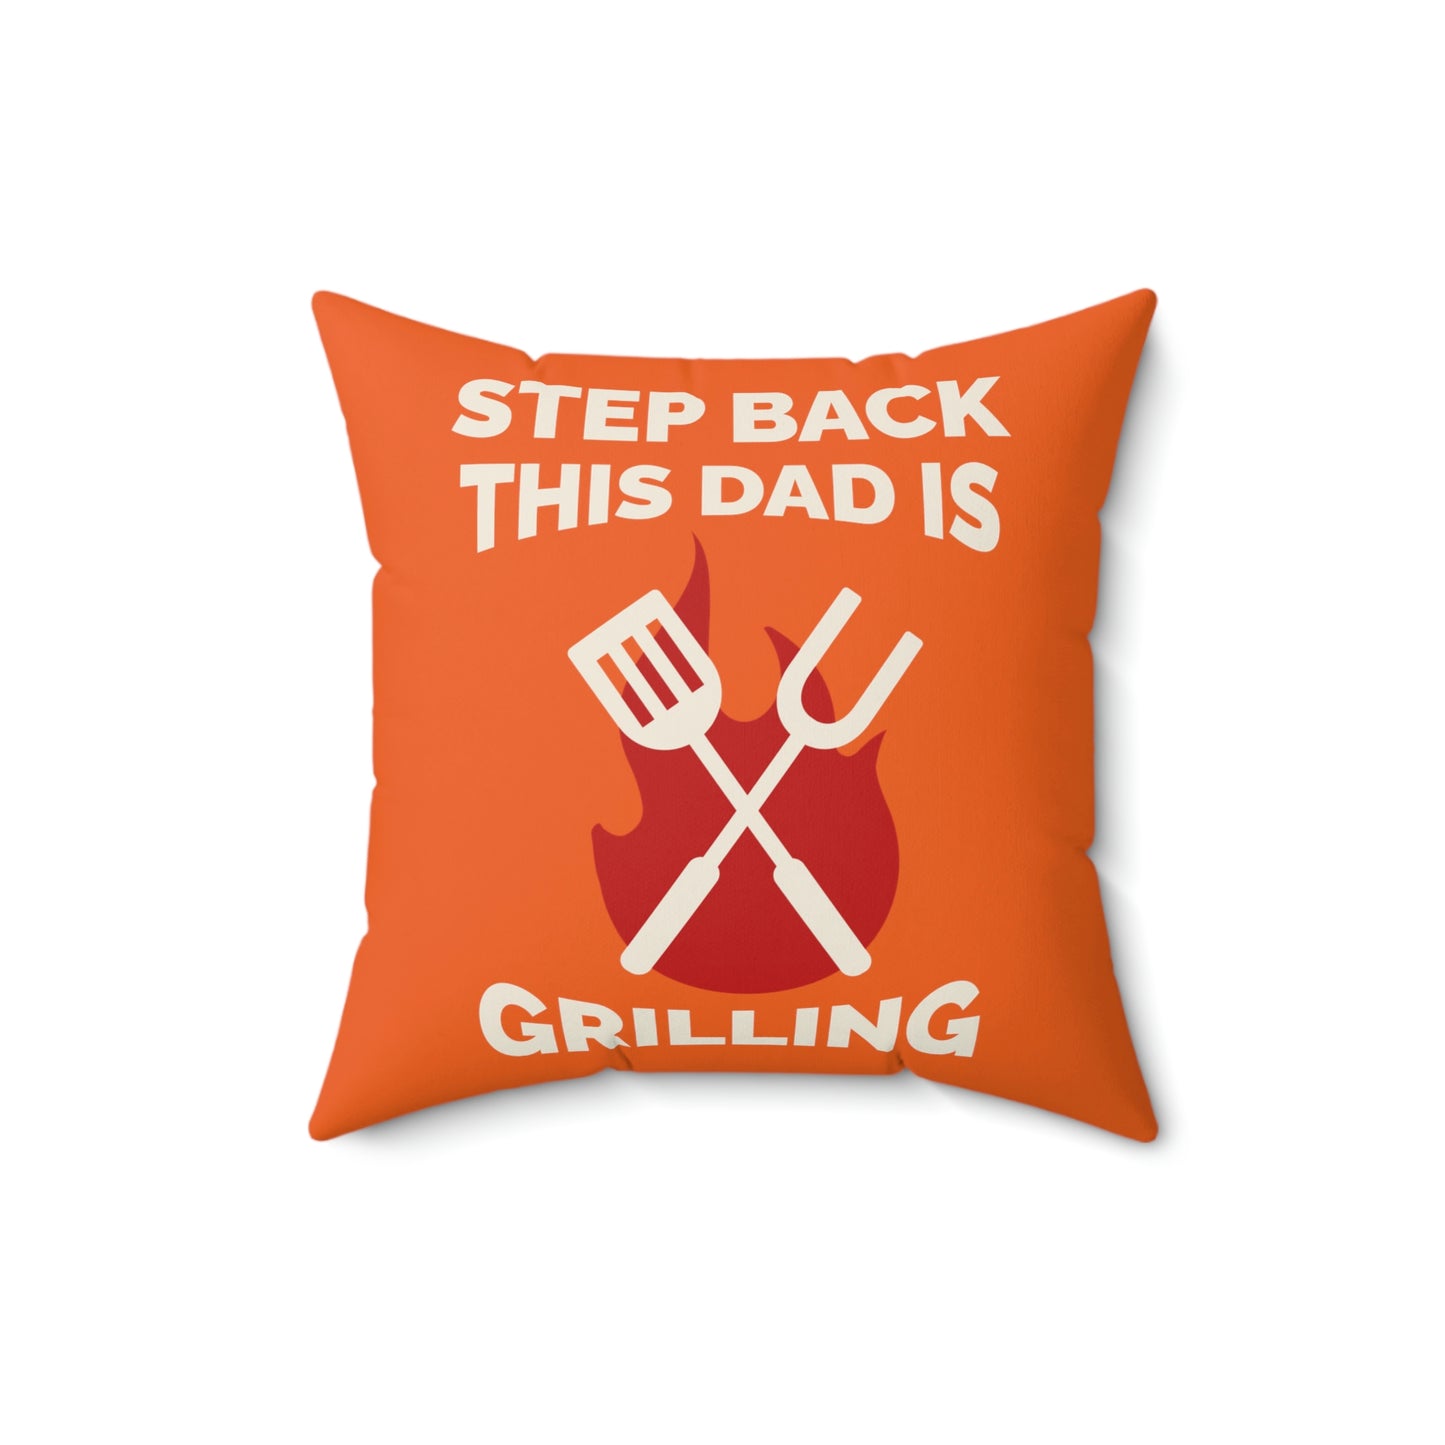 Spun Polyester Square Pillow Case "Step Back This Dad Is Grilling on Orange”